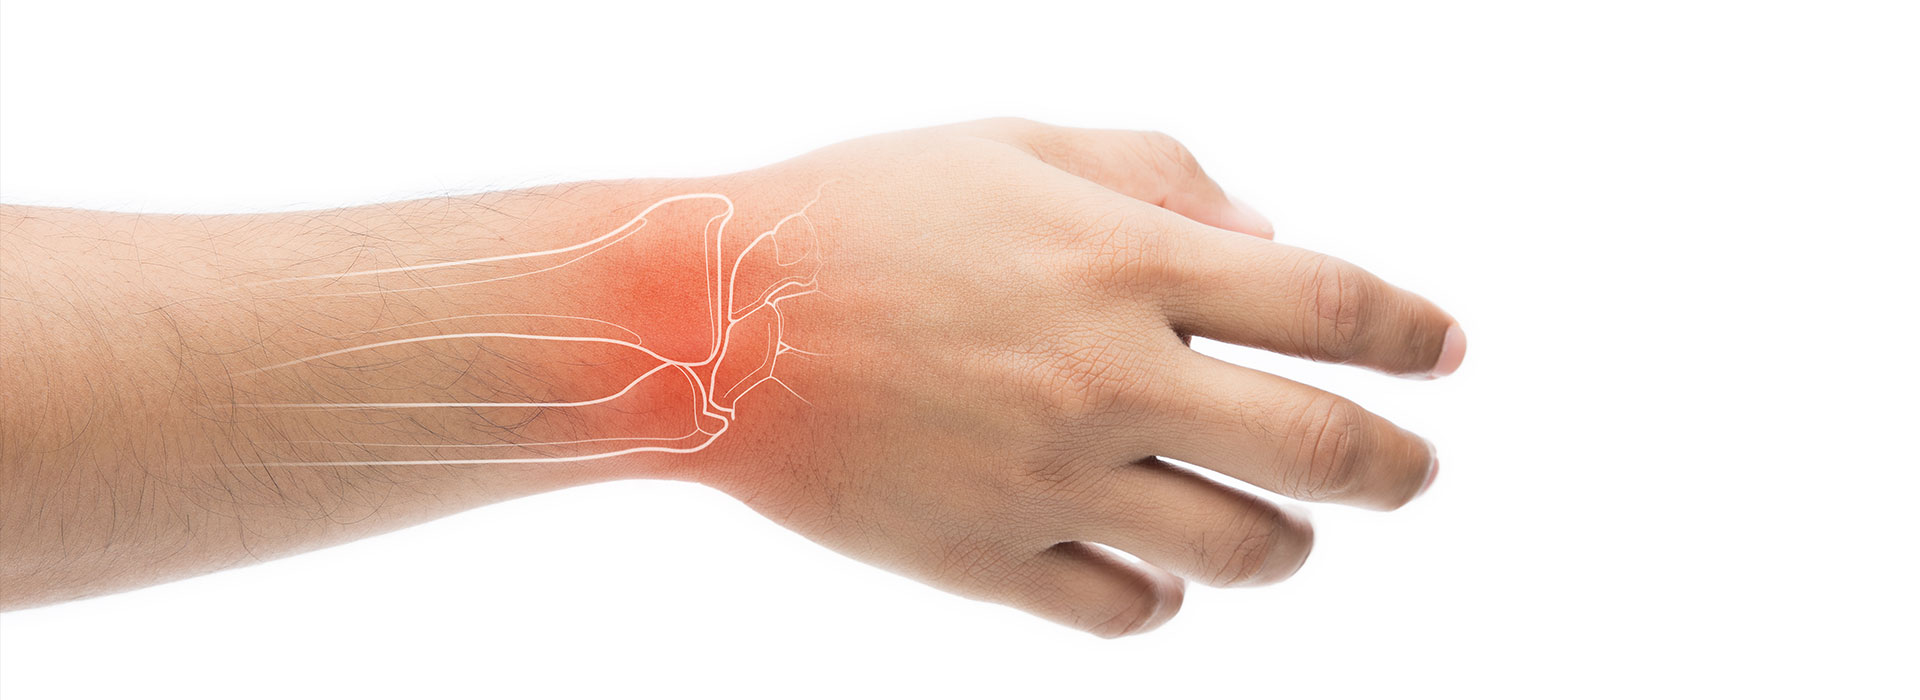 Carpal Tunnel Syndrome Treatment in Iran